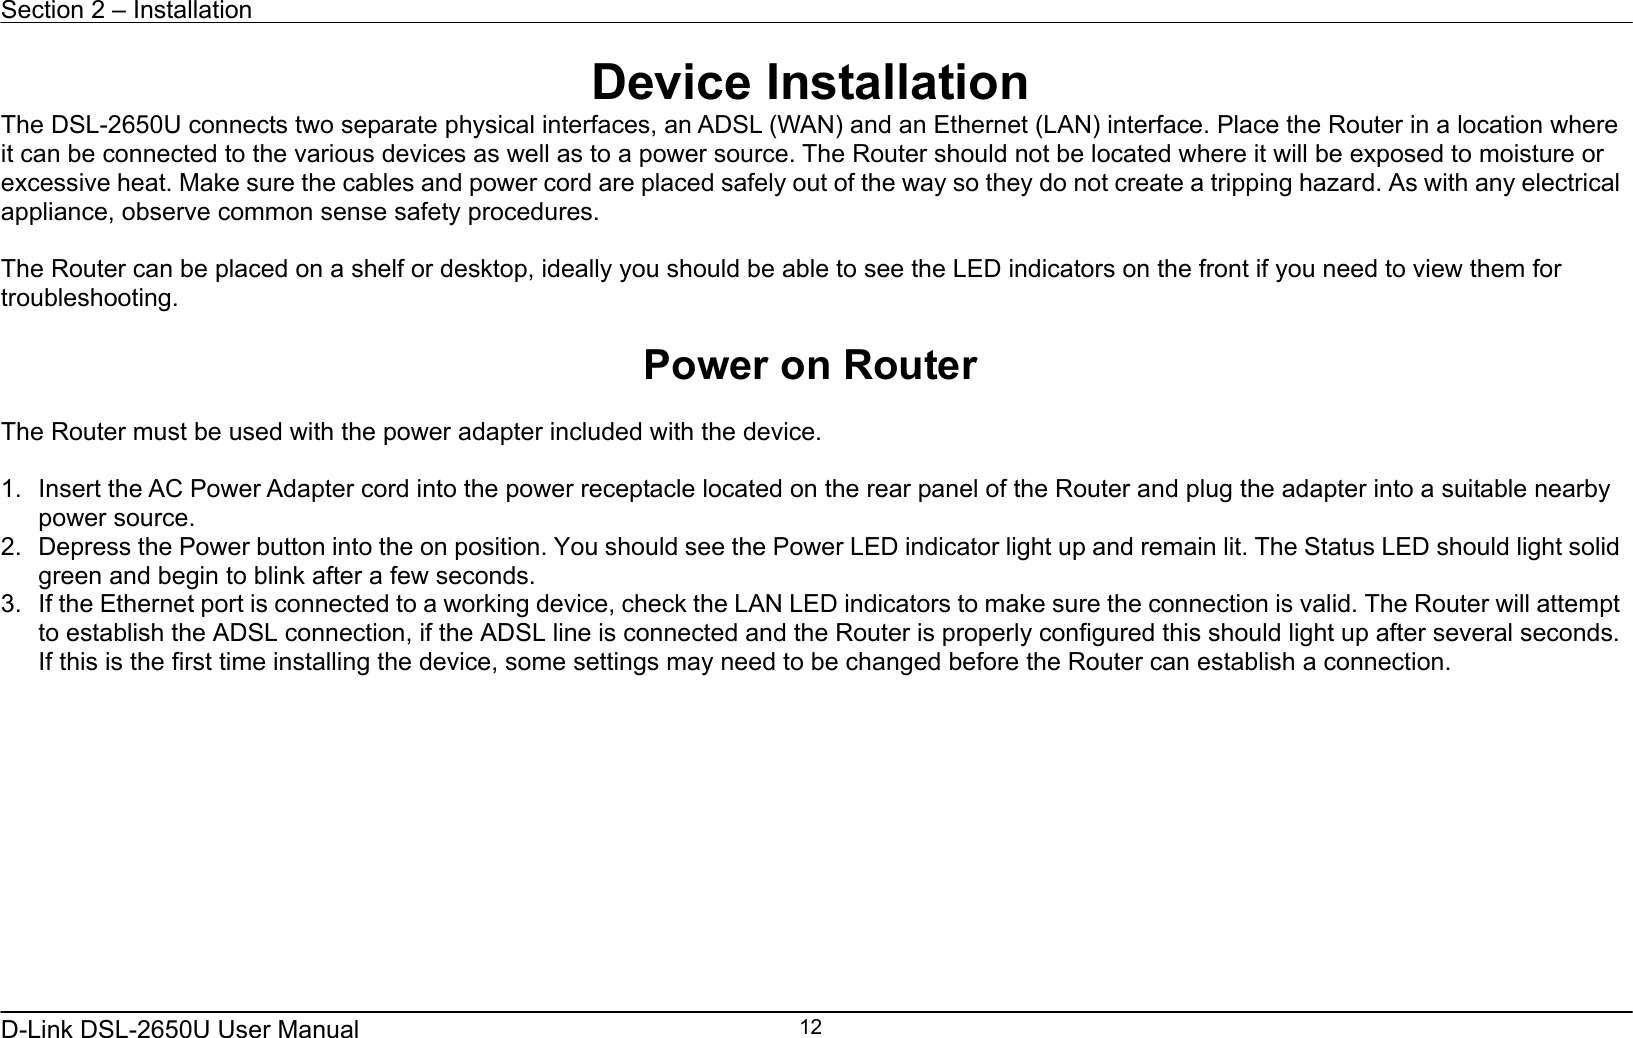 Section 2 – Installation   D-Link DSL-2650U User Manual    12Device Installation The DSL-2650U connects two separate physical interfaces, an ADSL (WAN) and an Ethernet (LAN) interface. Place the Router in a location where it can be connected to the various devices as well as to a power source. The Router should not be located where it will be exposed to moisture or excessive heat. Make sure the cables and power cord are placed safely out of the way so they do not create a tripping hazard. As with any electrical appliance, observe common sense safety procedures.  The Router can be placed on a shelf or desktop, ideally you should be able to see the LED indicators on the front if you need to view them for troubleshooting.  Power on Router  The Router must be used with the power adapter included with the device.  1.  Insert the AC Power Adapter cord into the power receptacle located on the rear panel of the Router and plug the adapter into a suitable nearby power source. 2.  Depress the Power button into the on position. You should see the Power LED indicator light up and remain lit. The Status LED should light solid green and begin to blink after a few seconds. 3.  If the Ethernet port is connected to a working device, check the LAN LED indicators to make sure the connection is valid. The Router will attempt to establish the ADSL connection, if the ADSL line is connected and the Router is properly configured this should light up after several seconds. If this is the first time installing the device, some settings may need to be changed before the Router can establish a connection.    